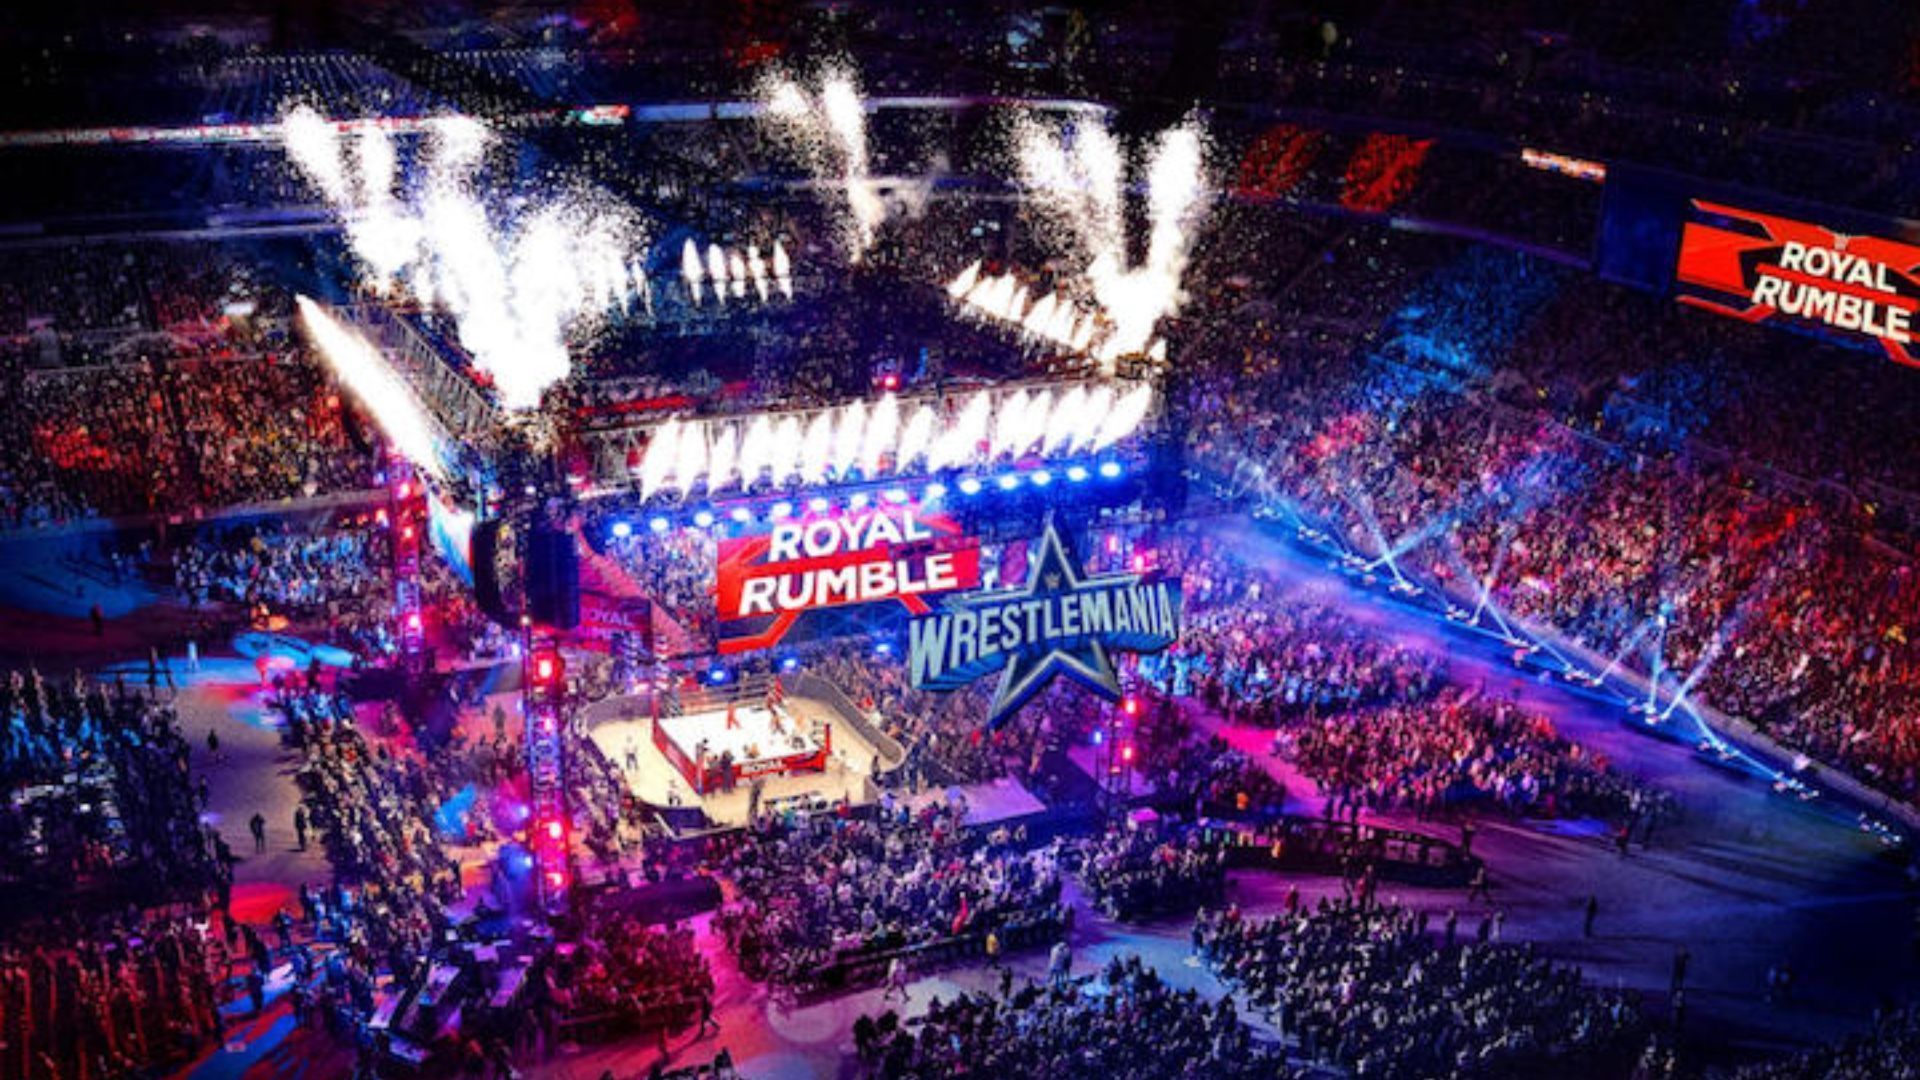 Royal Rumble 2022 took place inside The Dome at America